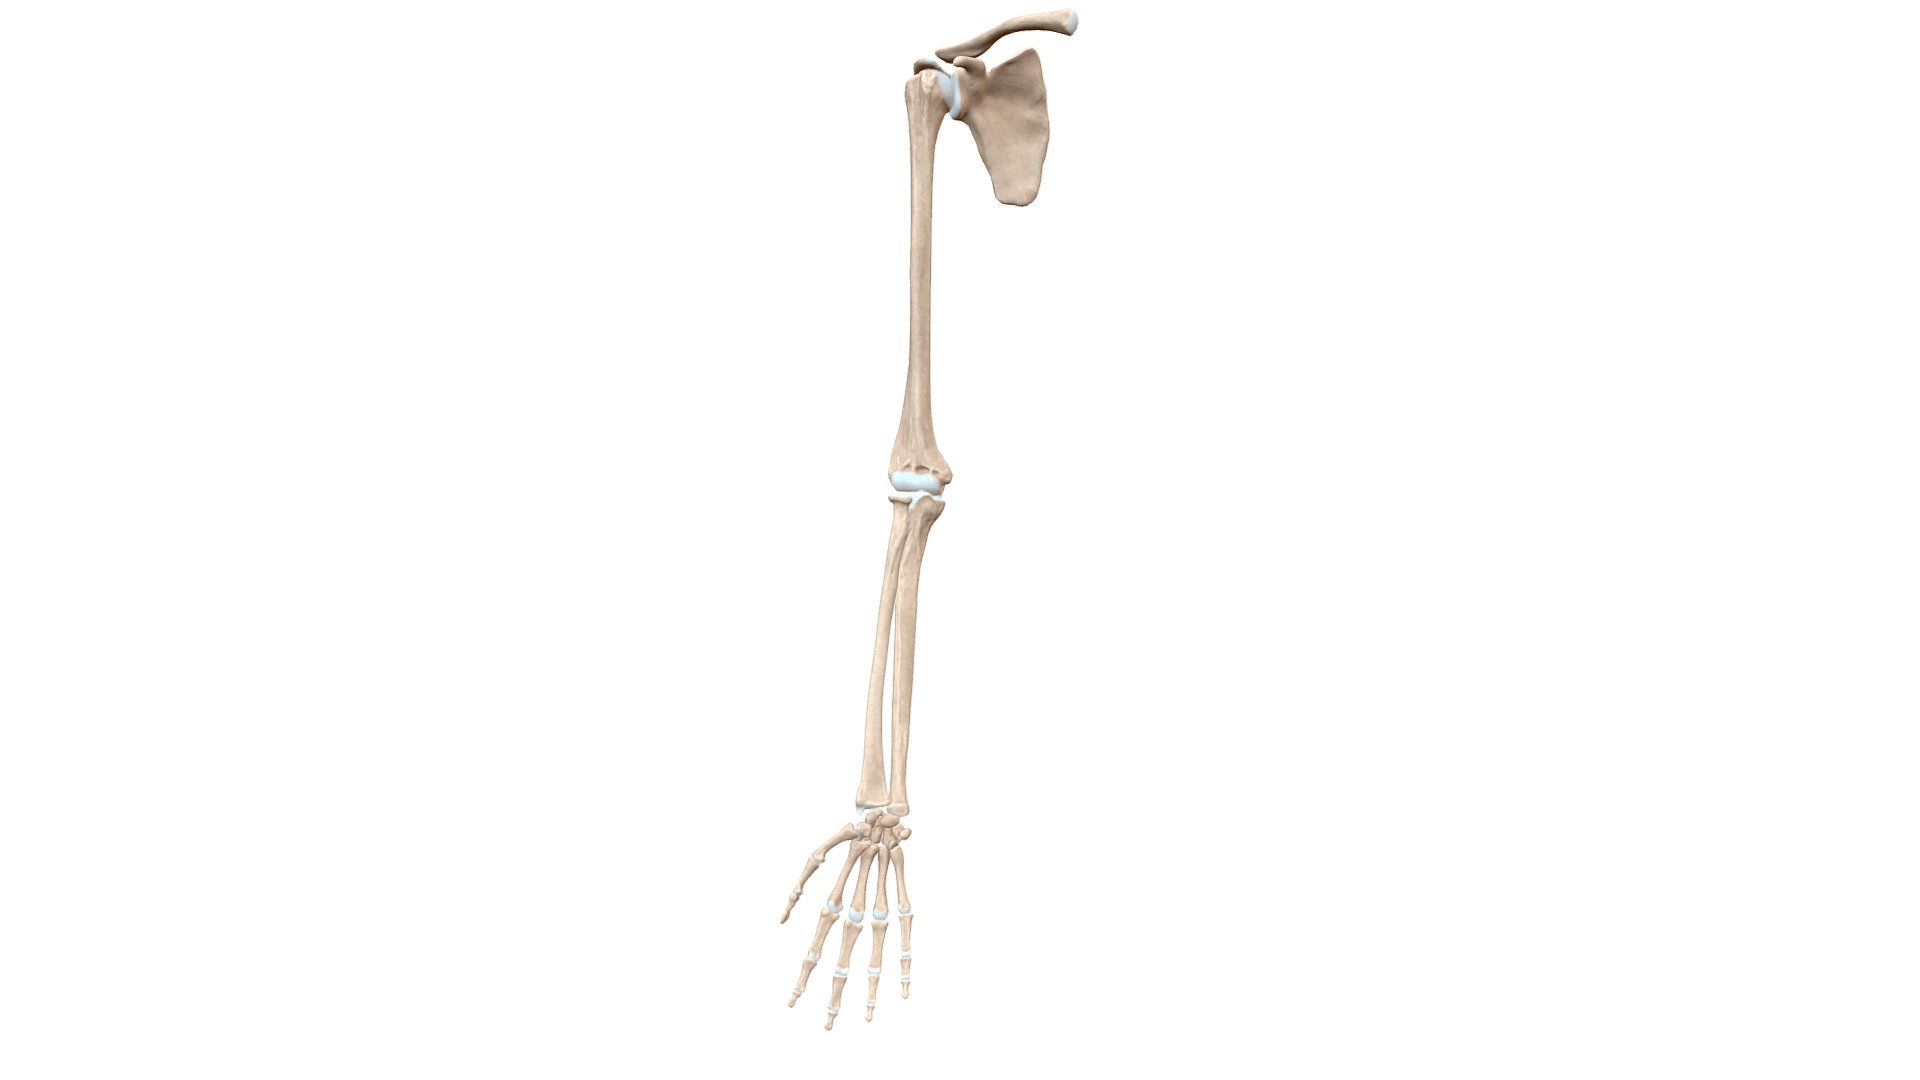 Hello everyone, I am here again with a new model. In this model, I have added articular cartilage to the bones of the upper limb. You can see the Clavicle, Scapula, Humerus, Radius, Ulna, Carpal bones, Metacarpal bones and phalanges 3d model